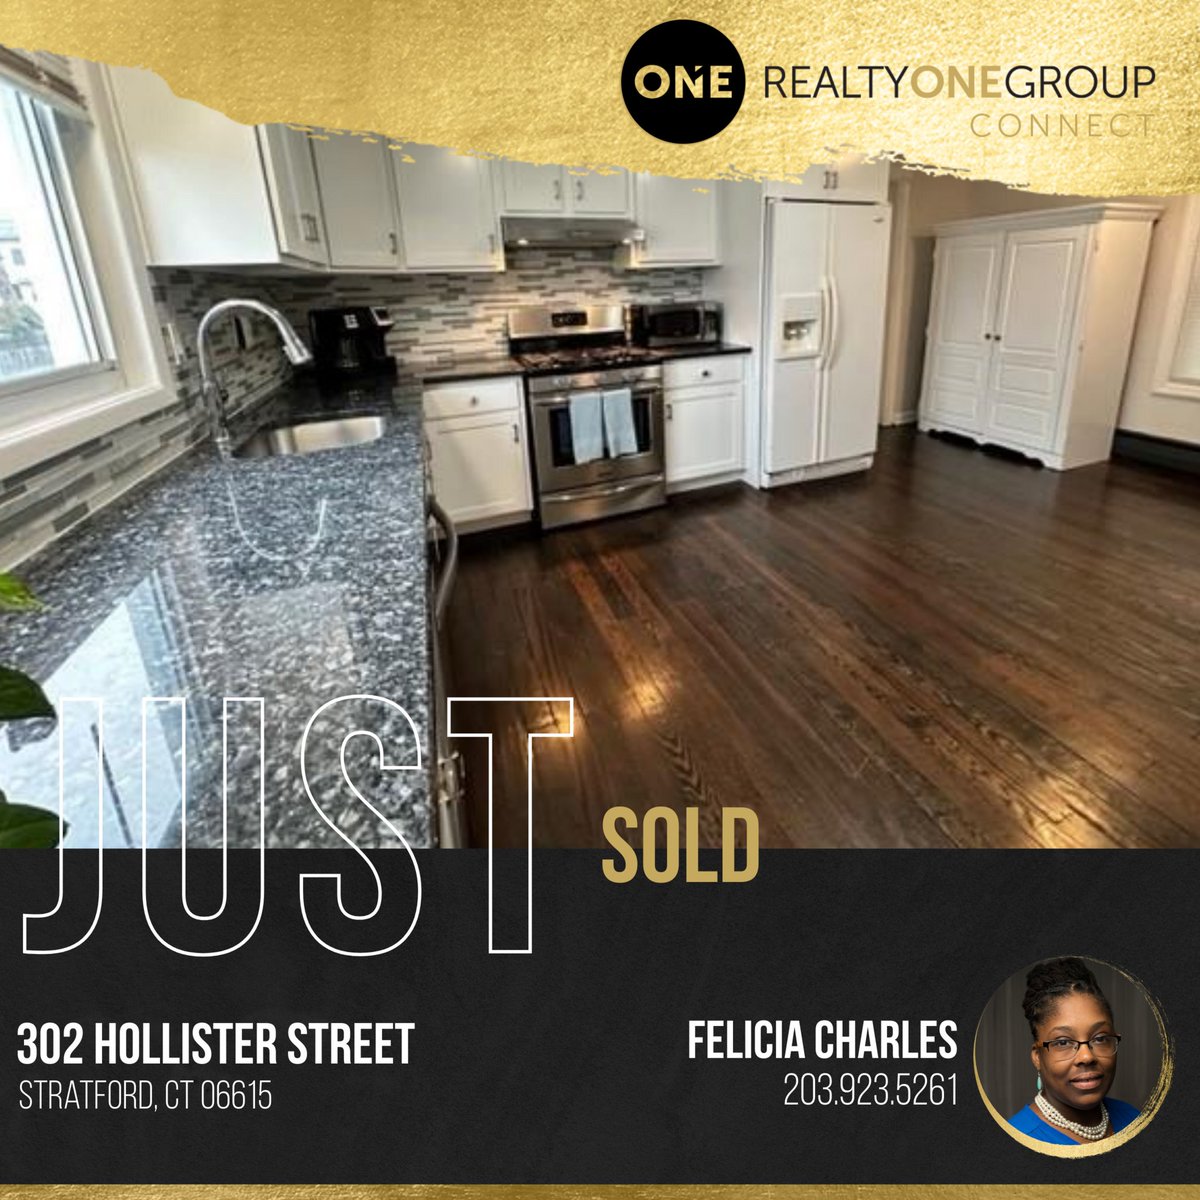 Another ONE Sold by Felicia Charles! Congrats to you & your clients! ☝️🙌 #JustSold #Realestate #Stratford #rogconnect #one #Openingdoors #RealtyONEGroupConnect A Modern, Lifestyle Real Estate Brand. 📣 📣 📣 #Connect with #ONE of... facebook.com/16025354531814…